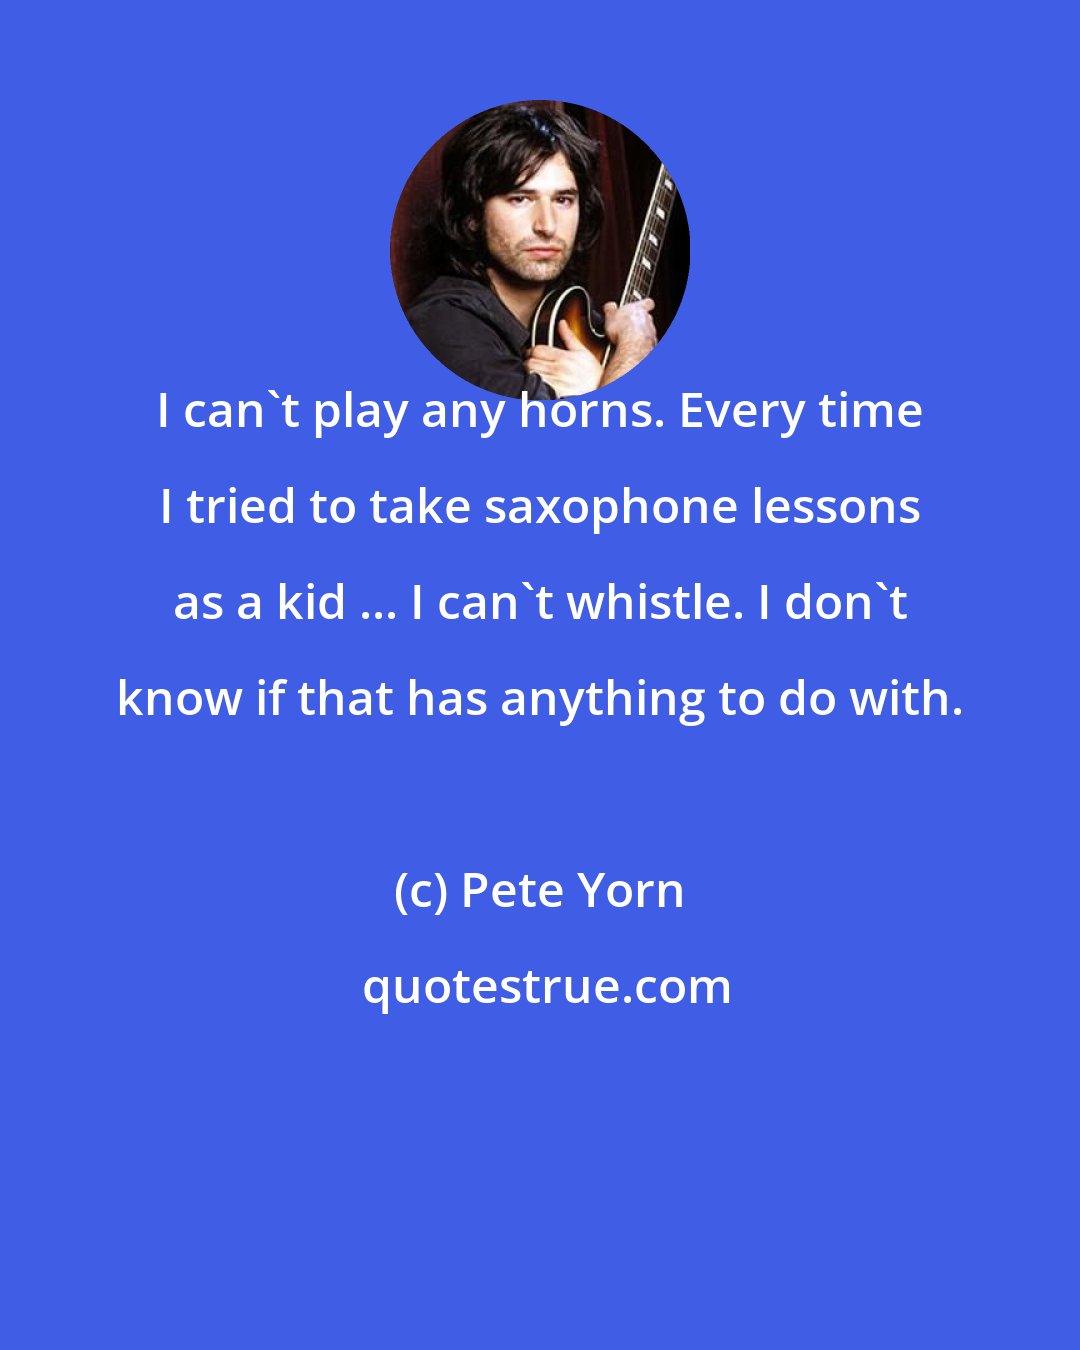 Pete Yorn: I can't play any horns. Every time I tried to take saxophone lessons as a kid ... I can't whistle. I don't know if that has anything to do with.